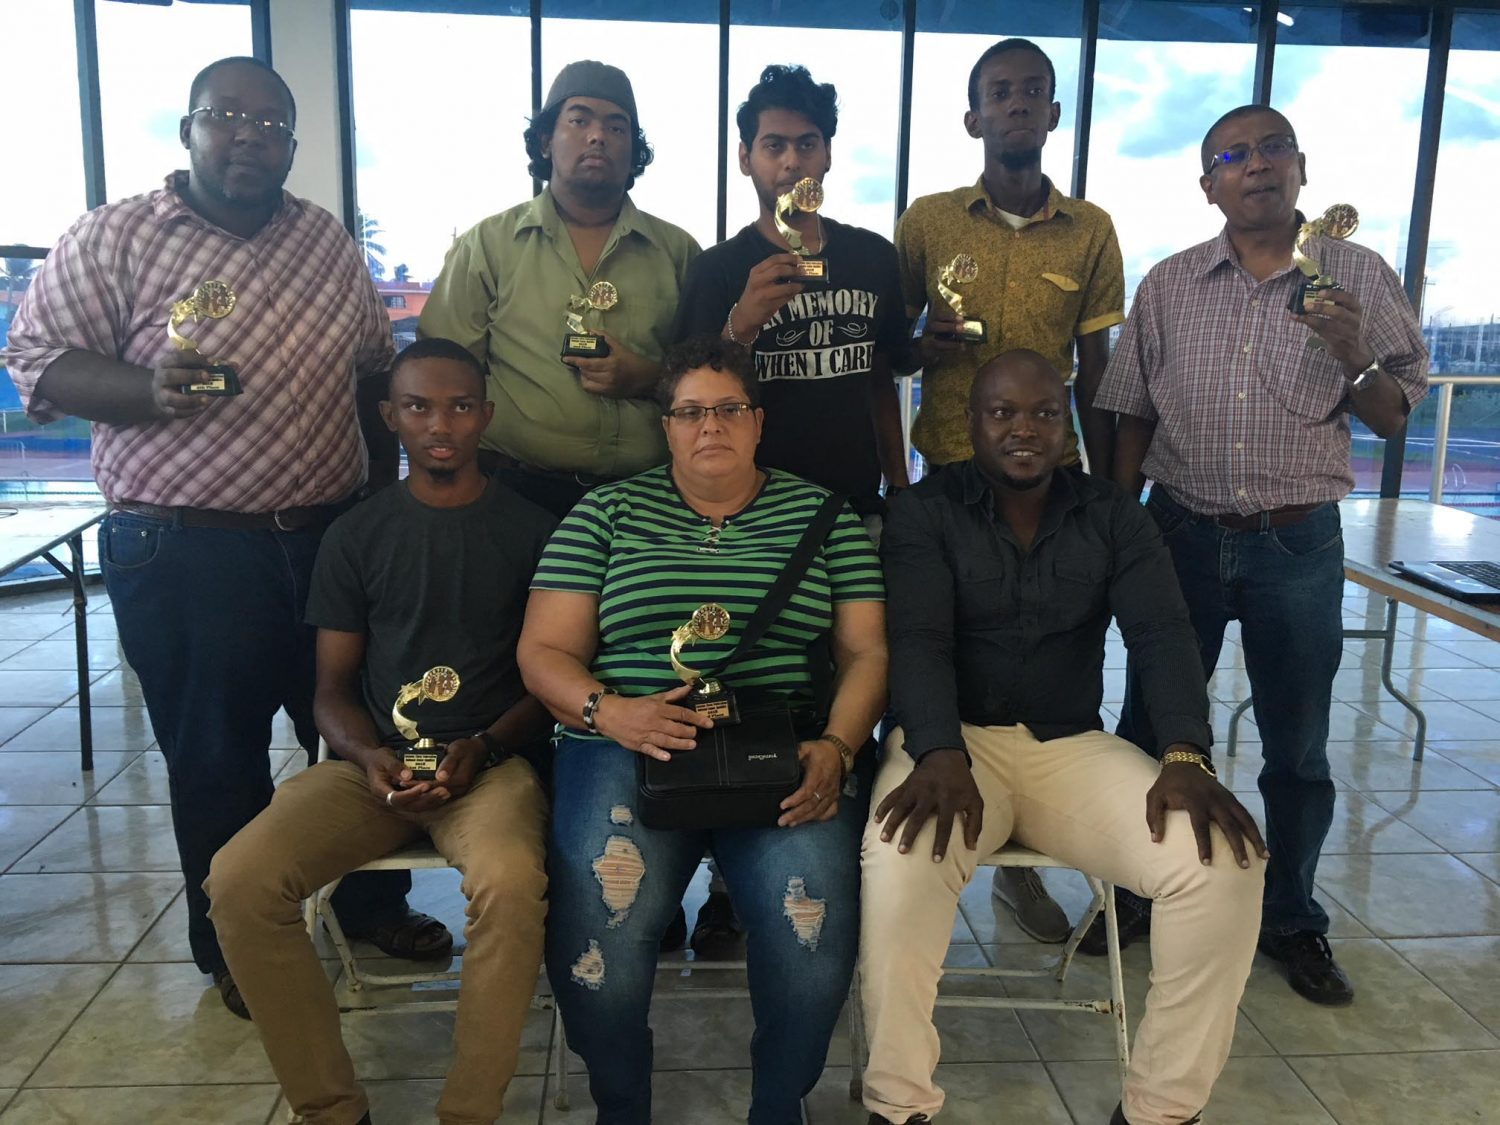 President of the Guyana Chess Federation James Bond (seated, right) with the seven participants who qualified to compete in the Senior National Chess Championship later in the year. The qualifiers will be joined by National Chess Champion Wendell Meusa for the championship. The seven qualifiers are: (standing left to right) Ronuel Greenidge, Taffin Khan Saeed Ali, Glenford Corlette and Loris Nathoo. Seated are: Anthony Drayton and Maria Varona-Thomas. 